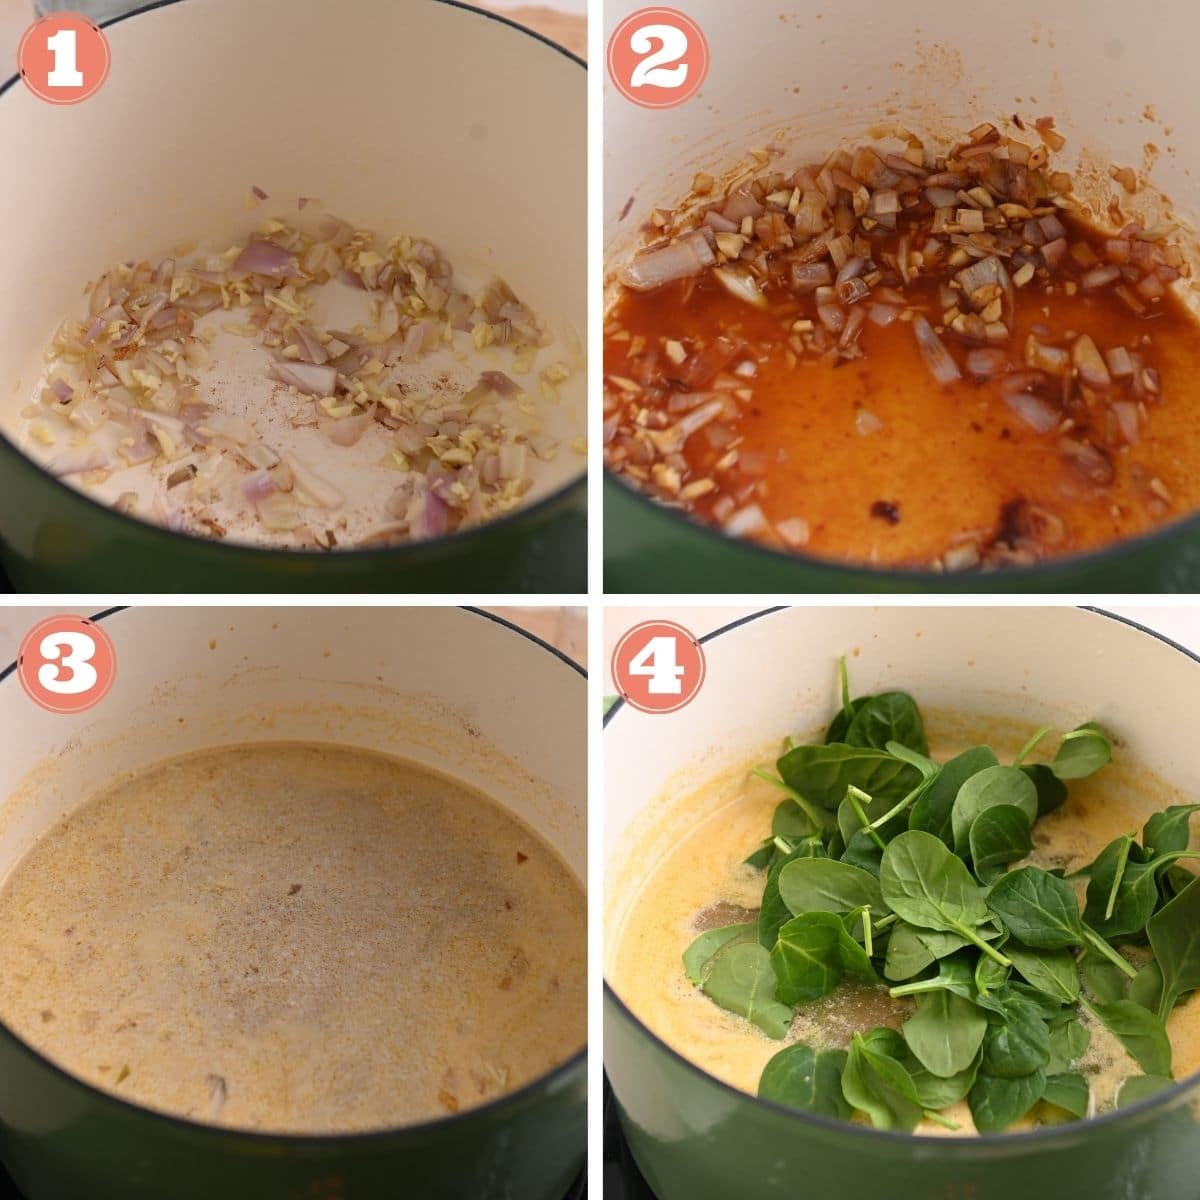 Steps 1 through 4 to make the soup